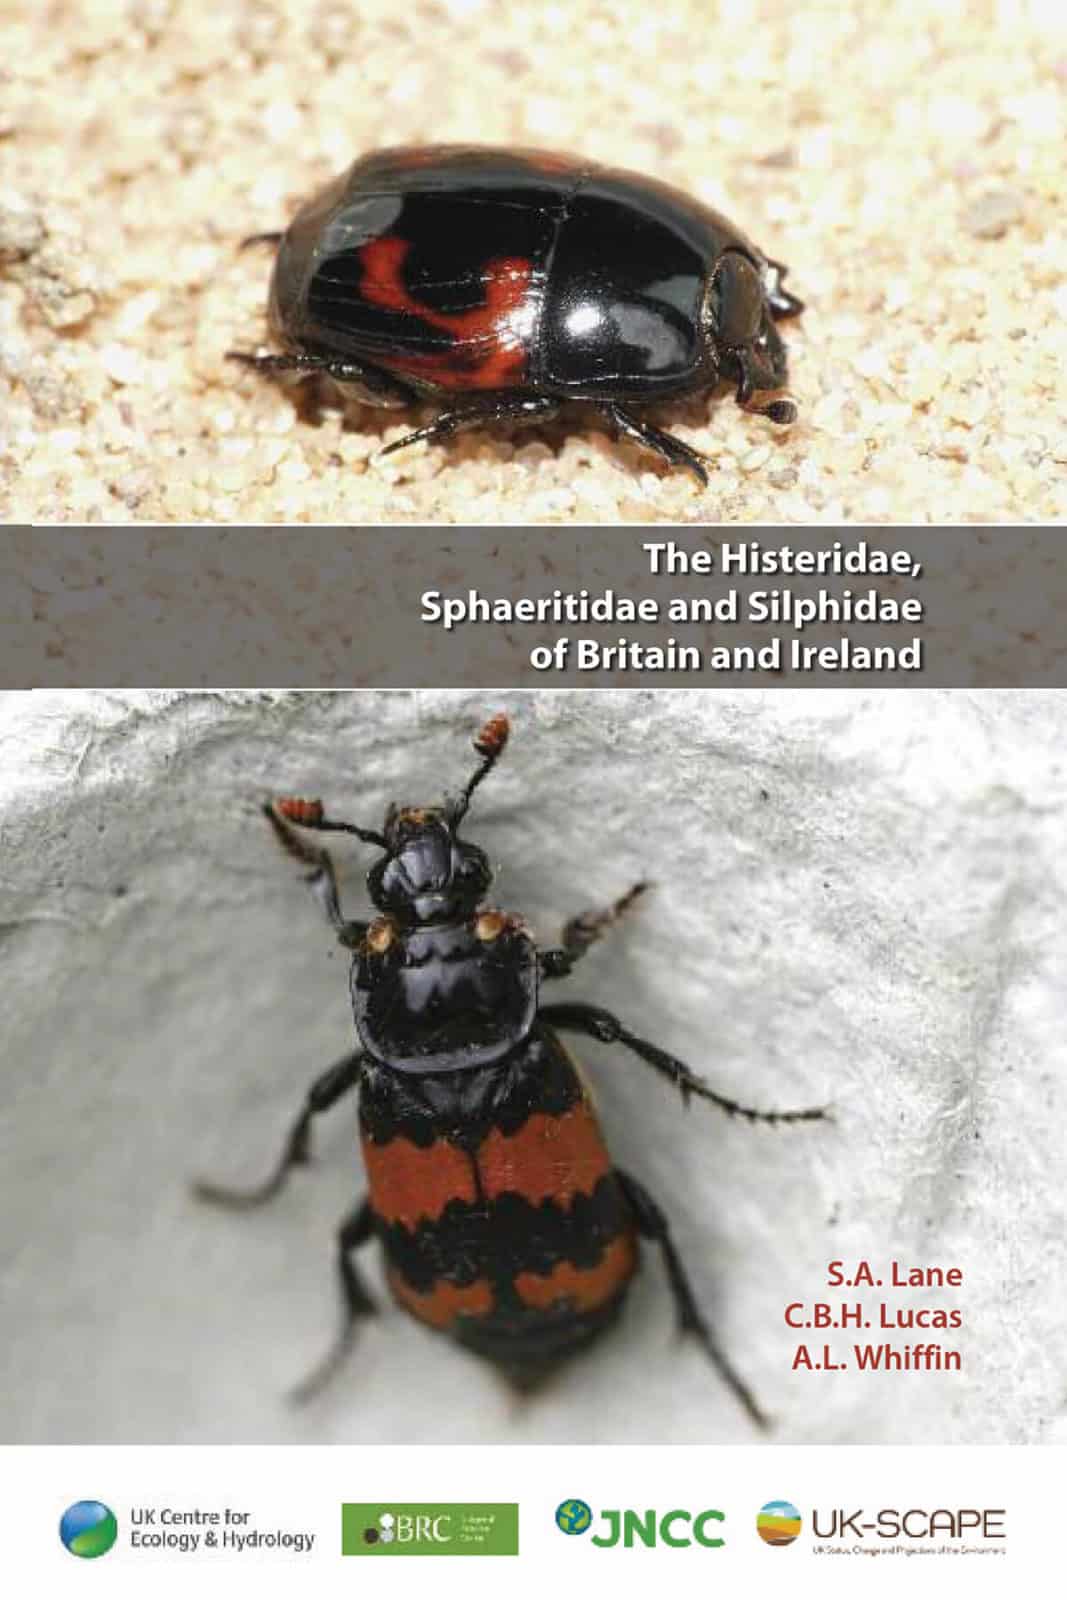 histeridae and silphidae